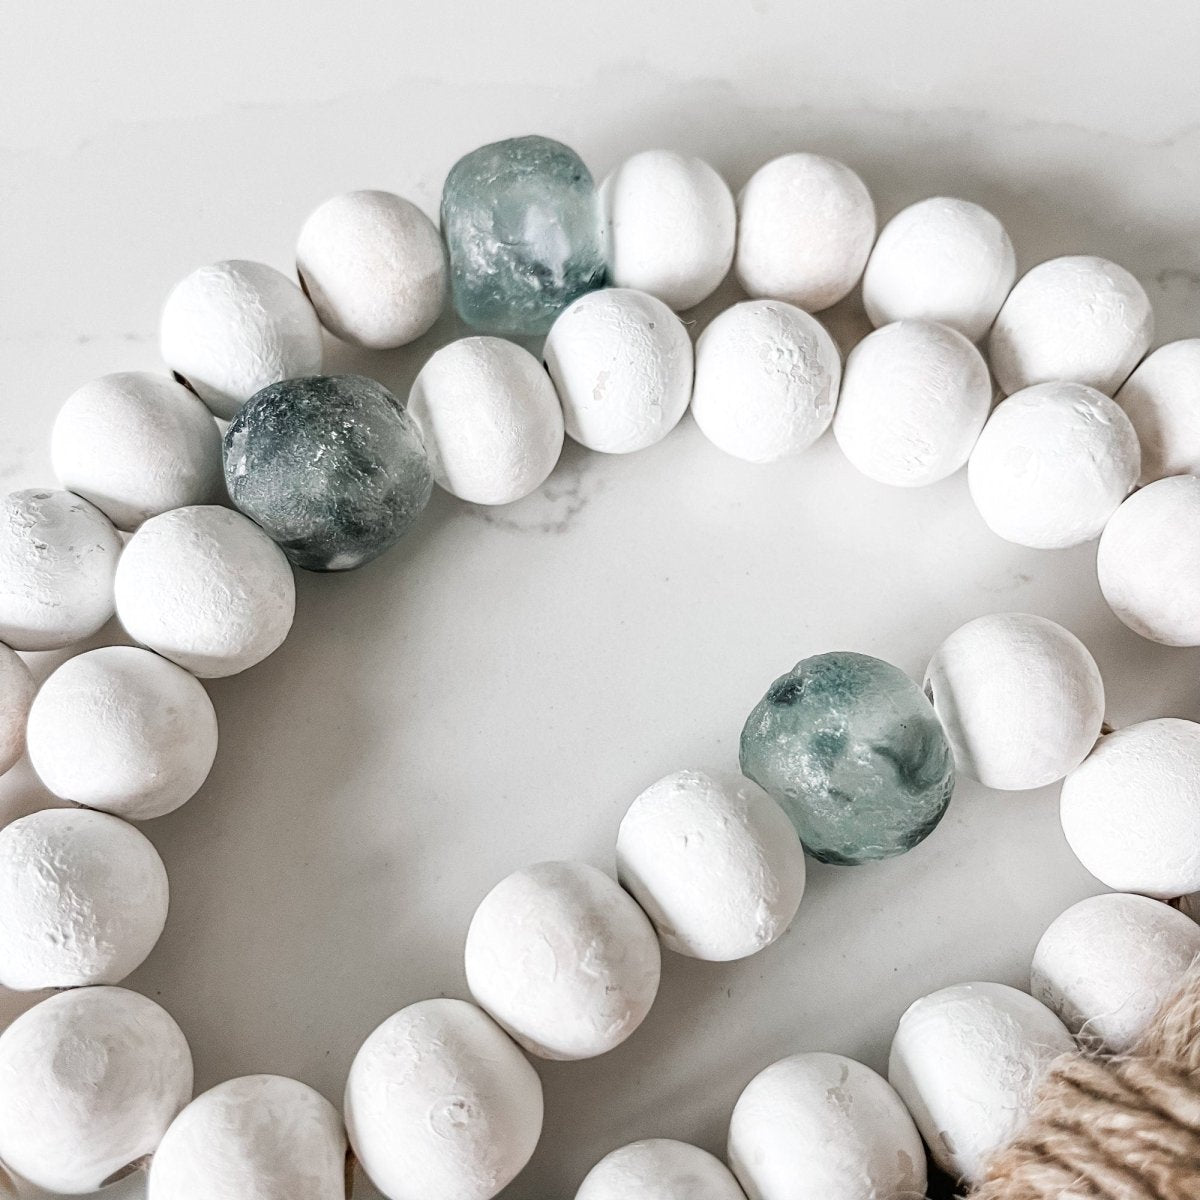 Load image into Gallery viewer, Whitewashed Wood Bead Garland with Jumbo Gray Recycled Glass Beads - sonder and wolf
